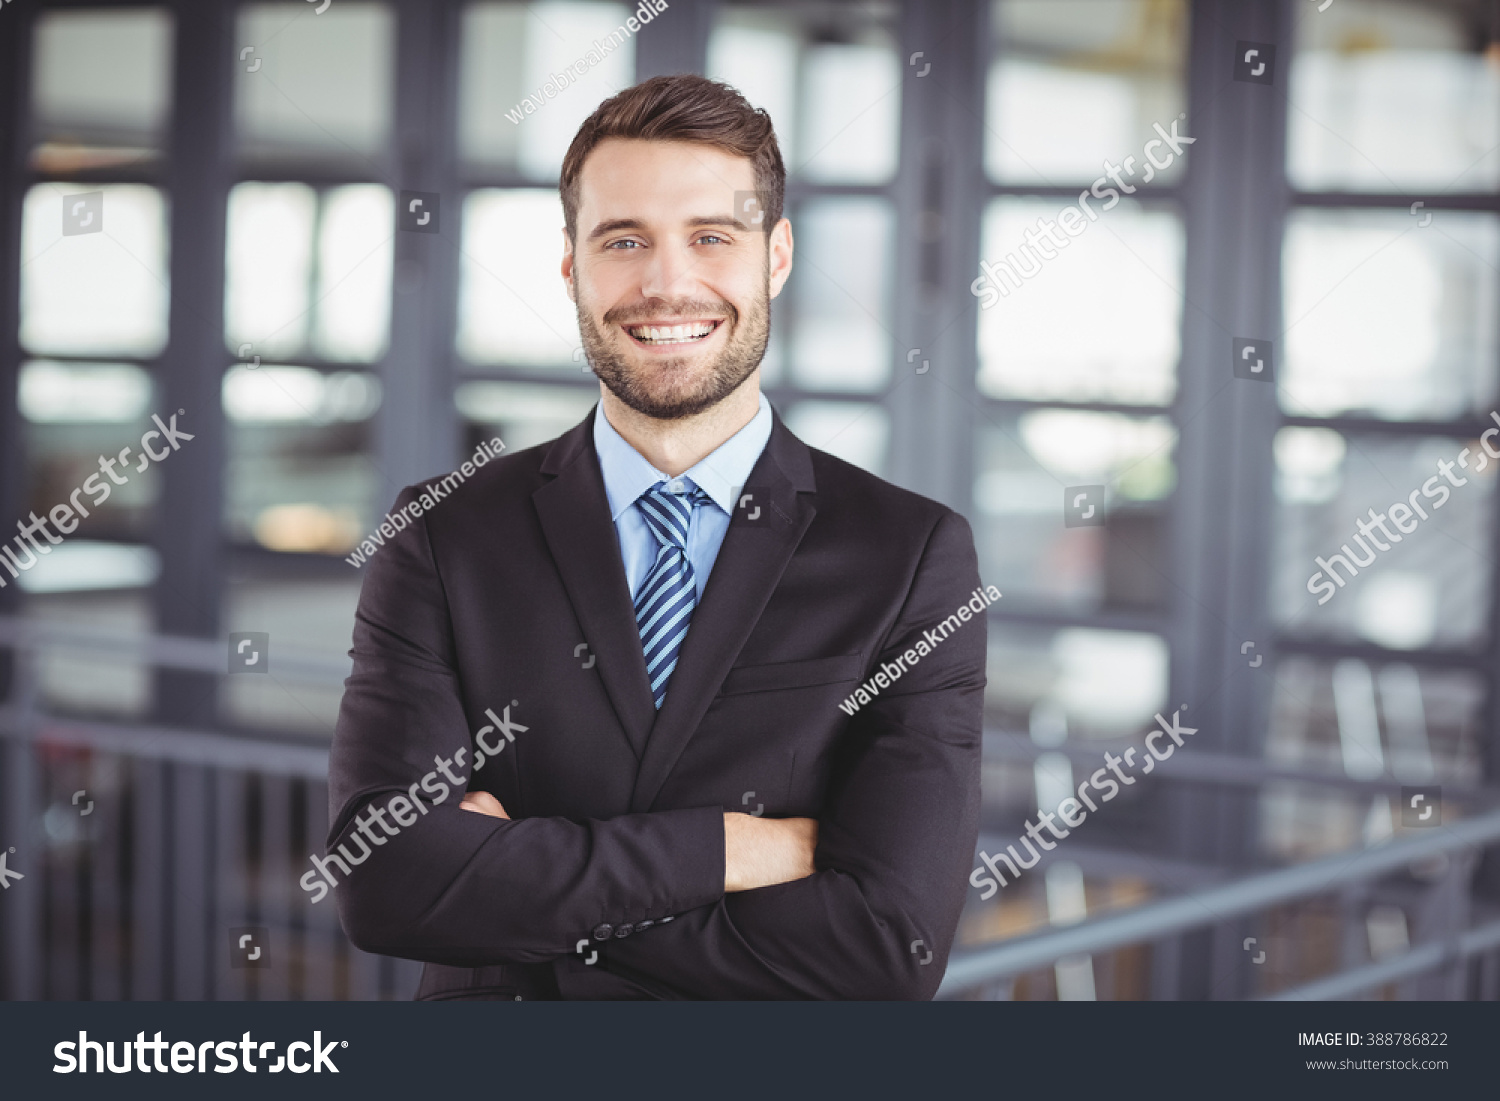 Portrait of happy businessman with arms crossed standing in office #388786822